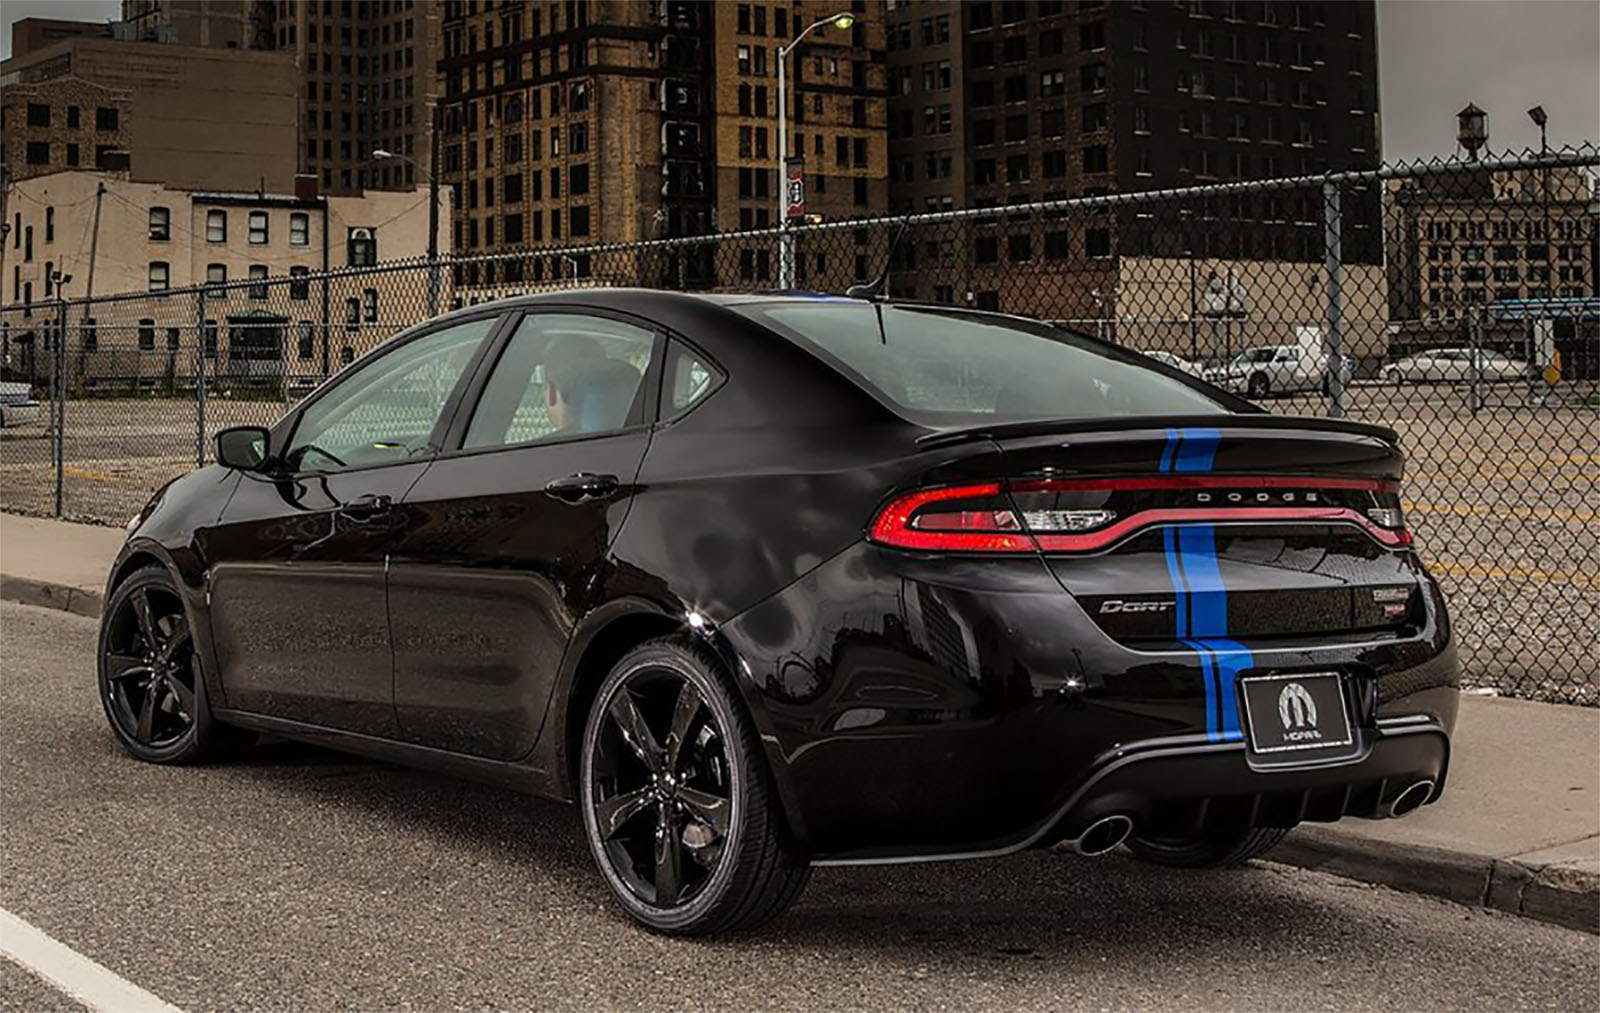 PAINTED FACTORY STYLE SPOILER fits the 2013 2014 2015 2016 2017 DODGE DART